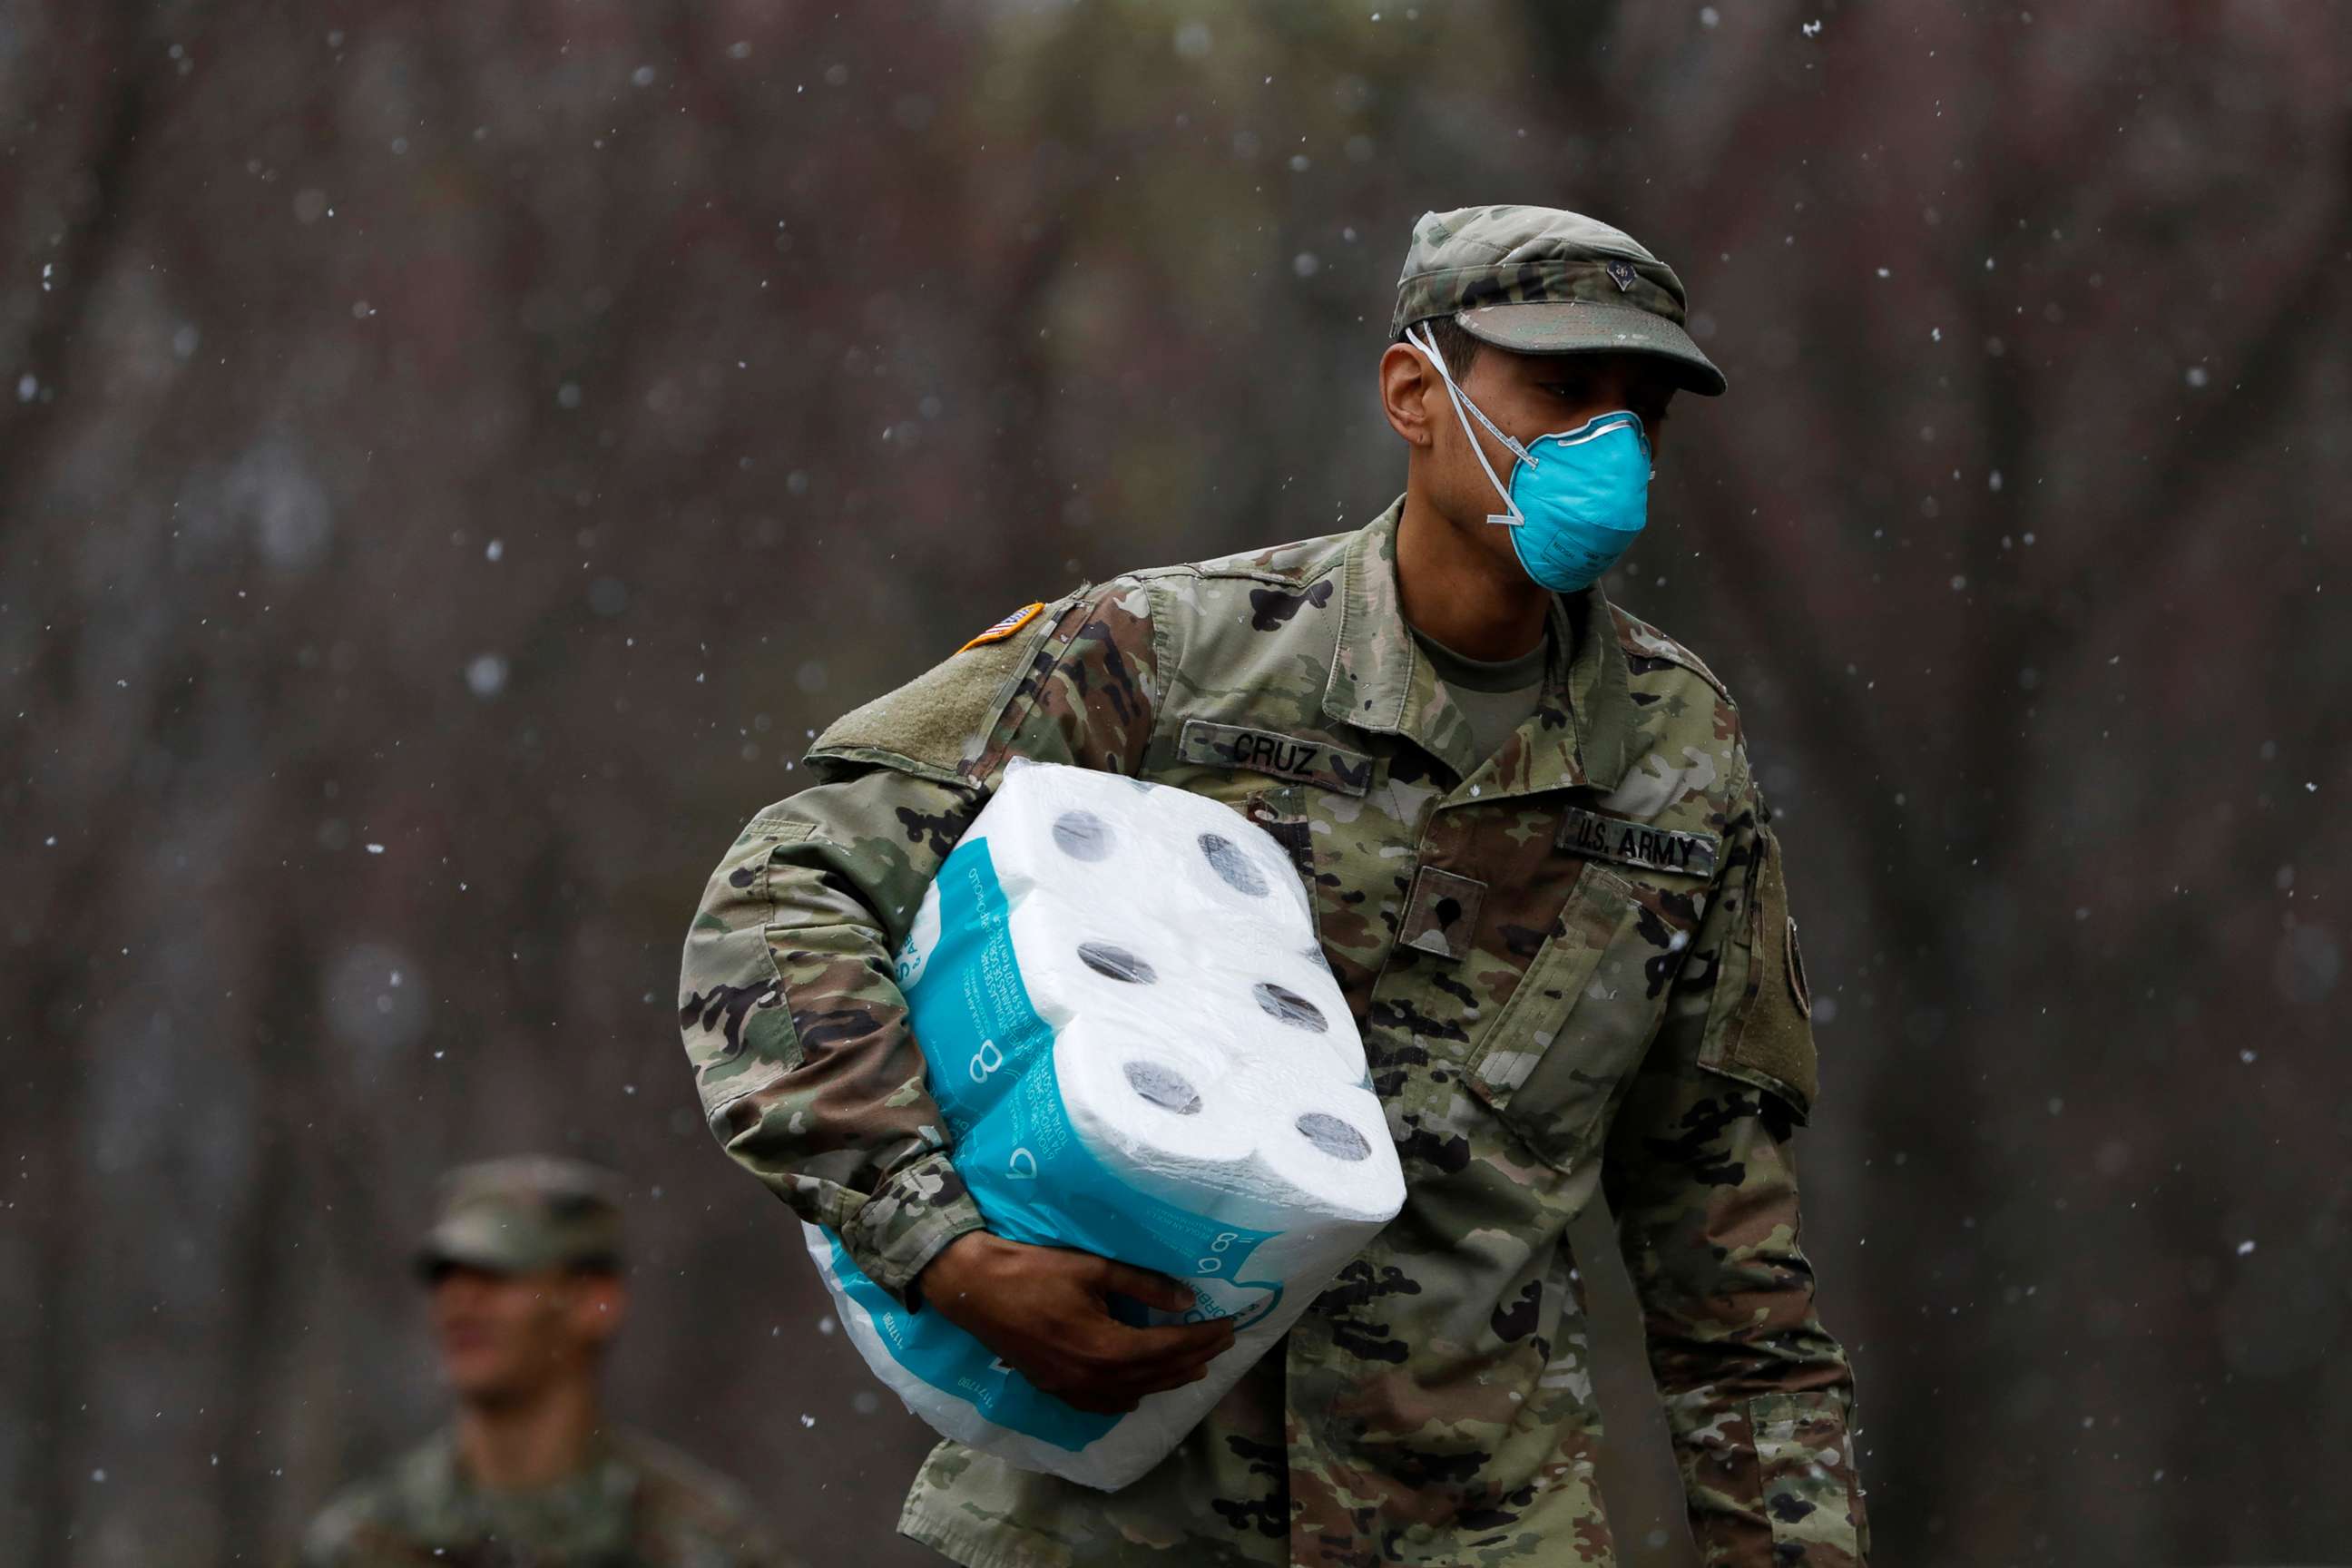 PHOTO: A member of Joint Task Force 2, composed of soldiers and airmen from the New York Army and Air National Guard, wears a face mask while carrying paper towels during the coronavirus outbreak in New Rochelle, N.Y., March 23, 2020. 